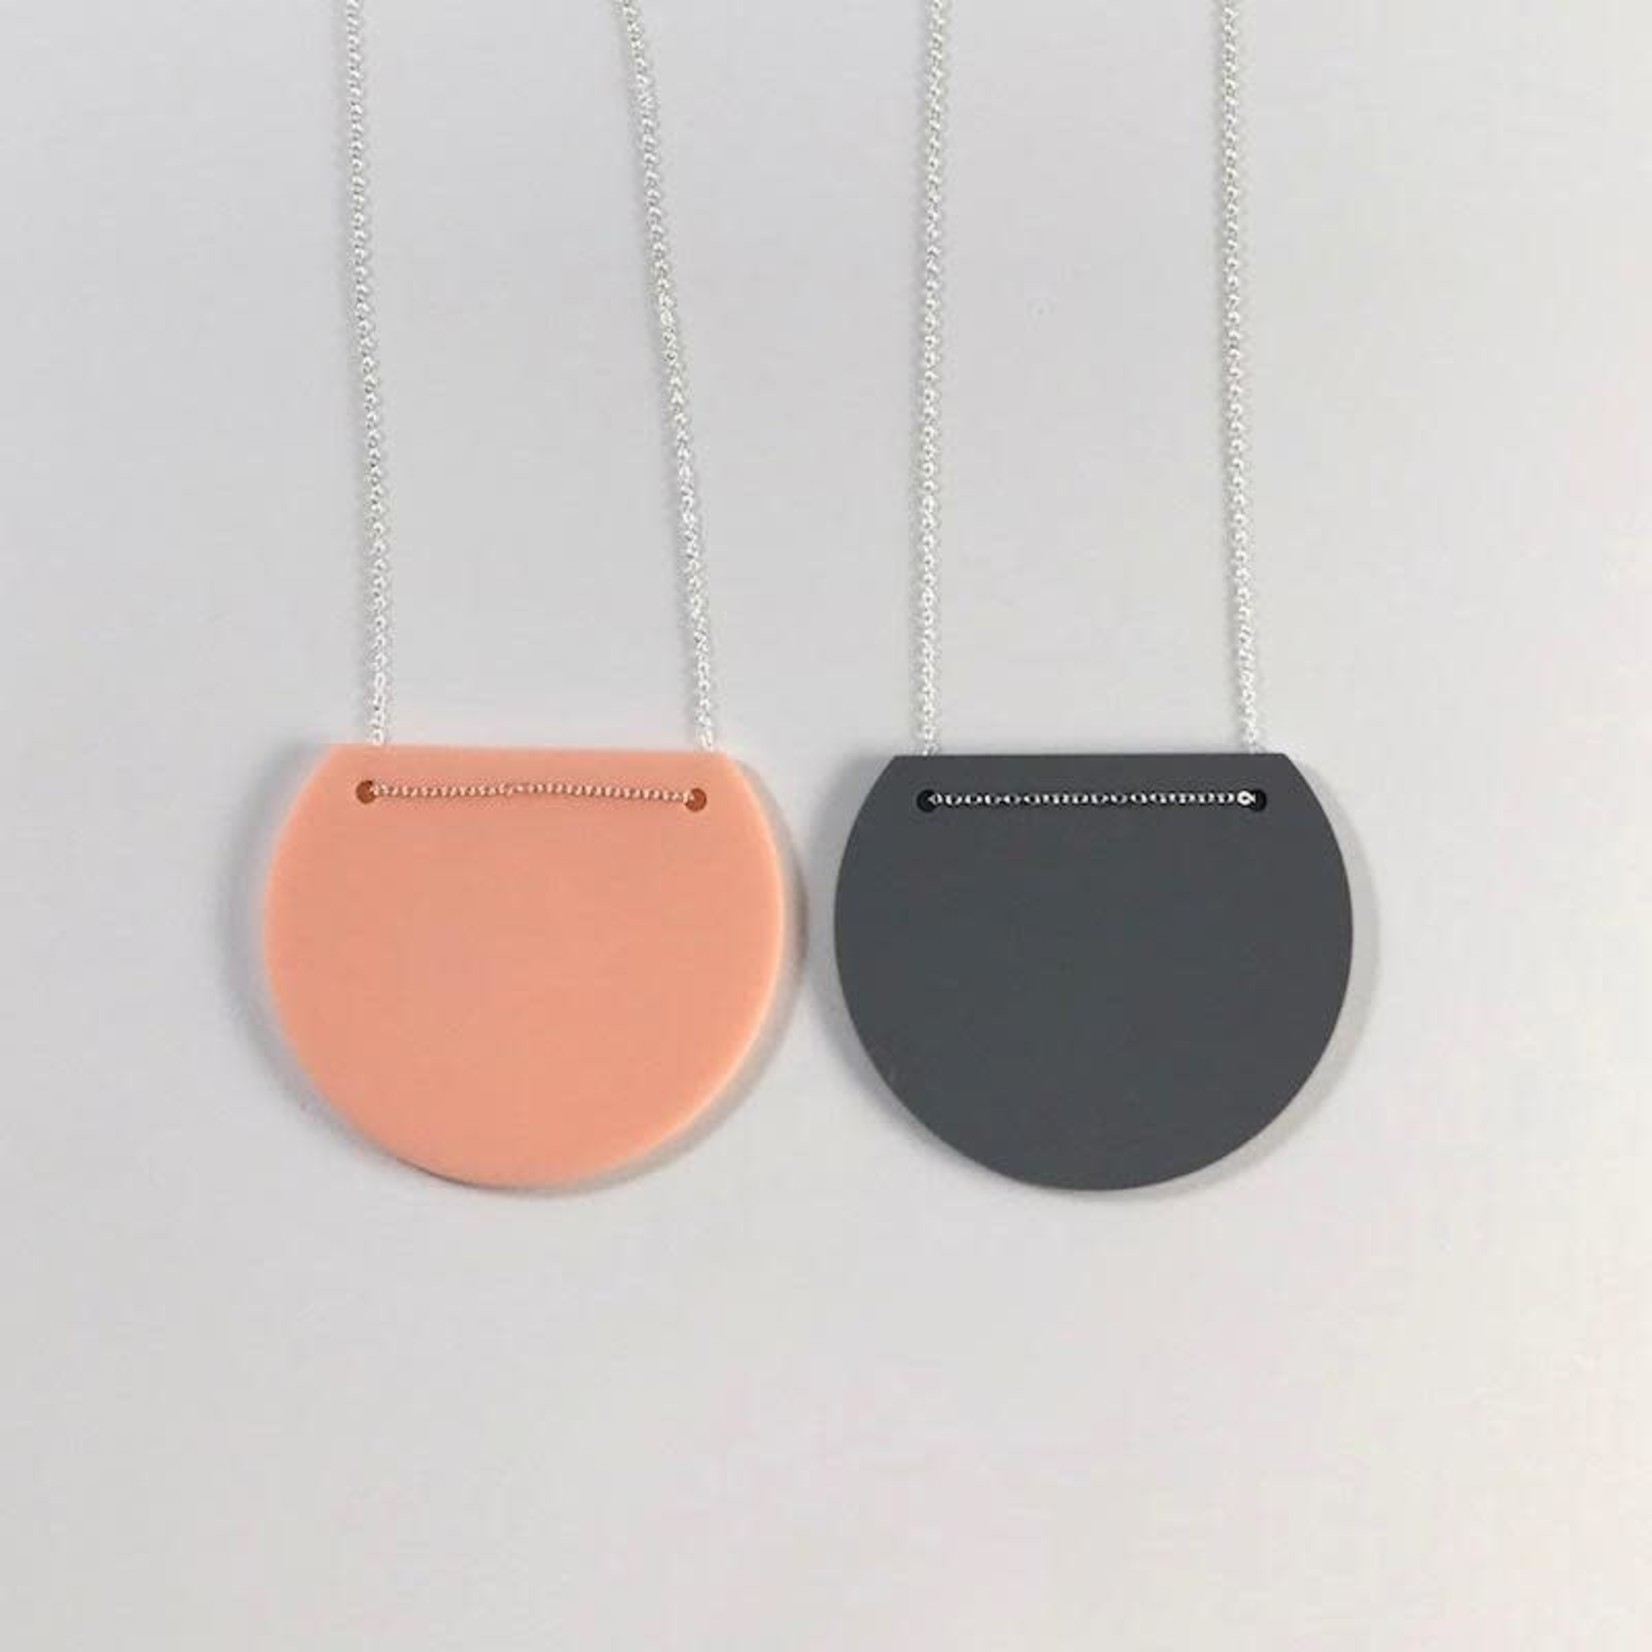 ZASS Modern Viva Necklace made from Rescued Architectural Materials